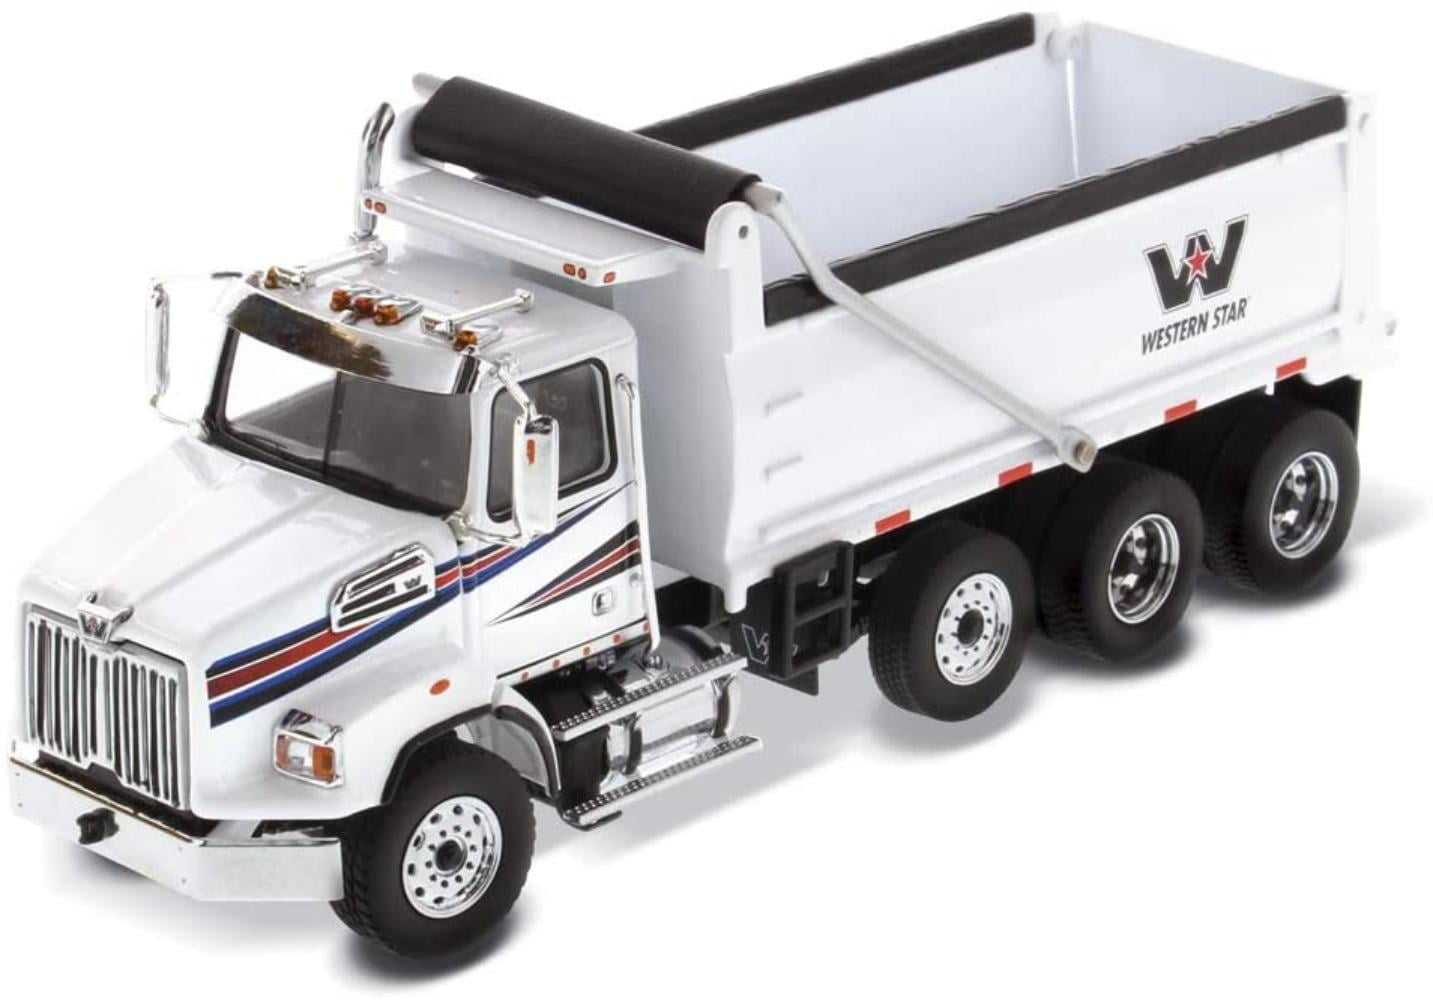 1/50 Western Star 4700 SB Dump Truck White Model by Diecast Masters 71034 for sale online